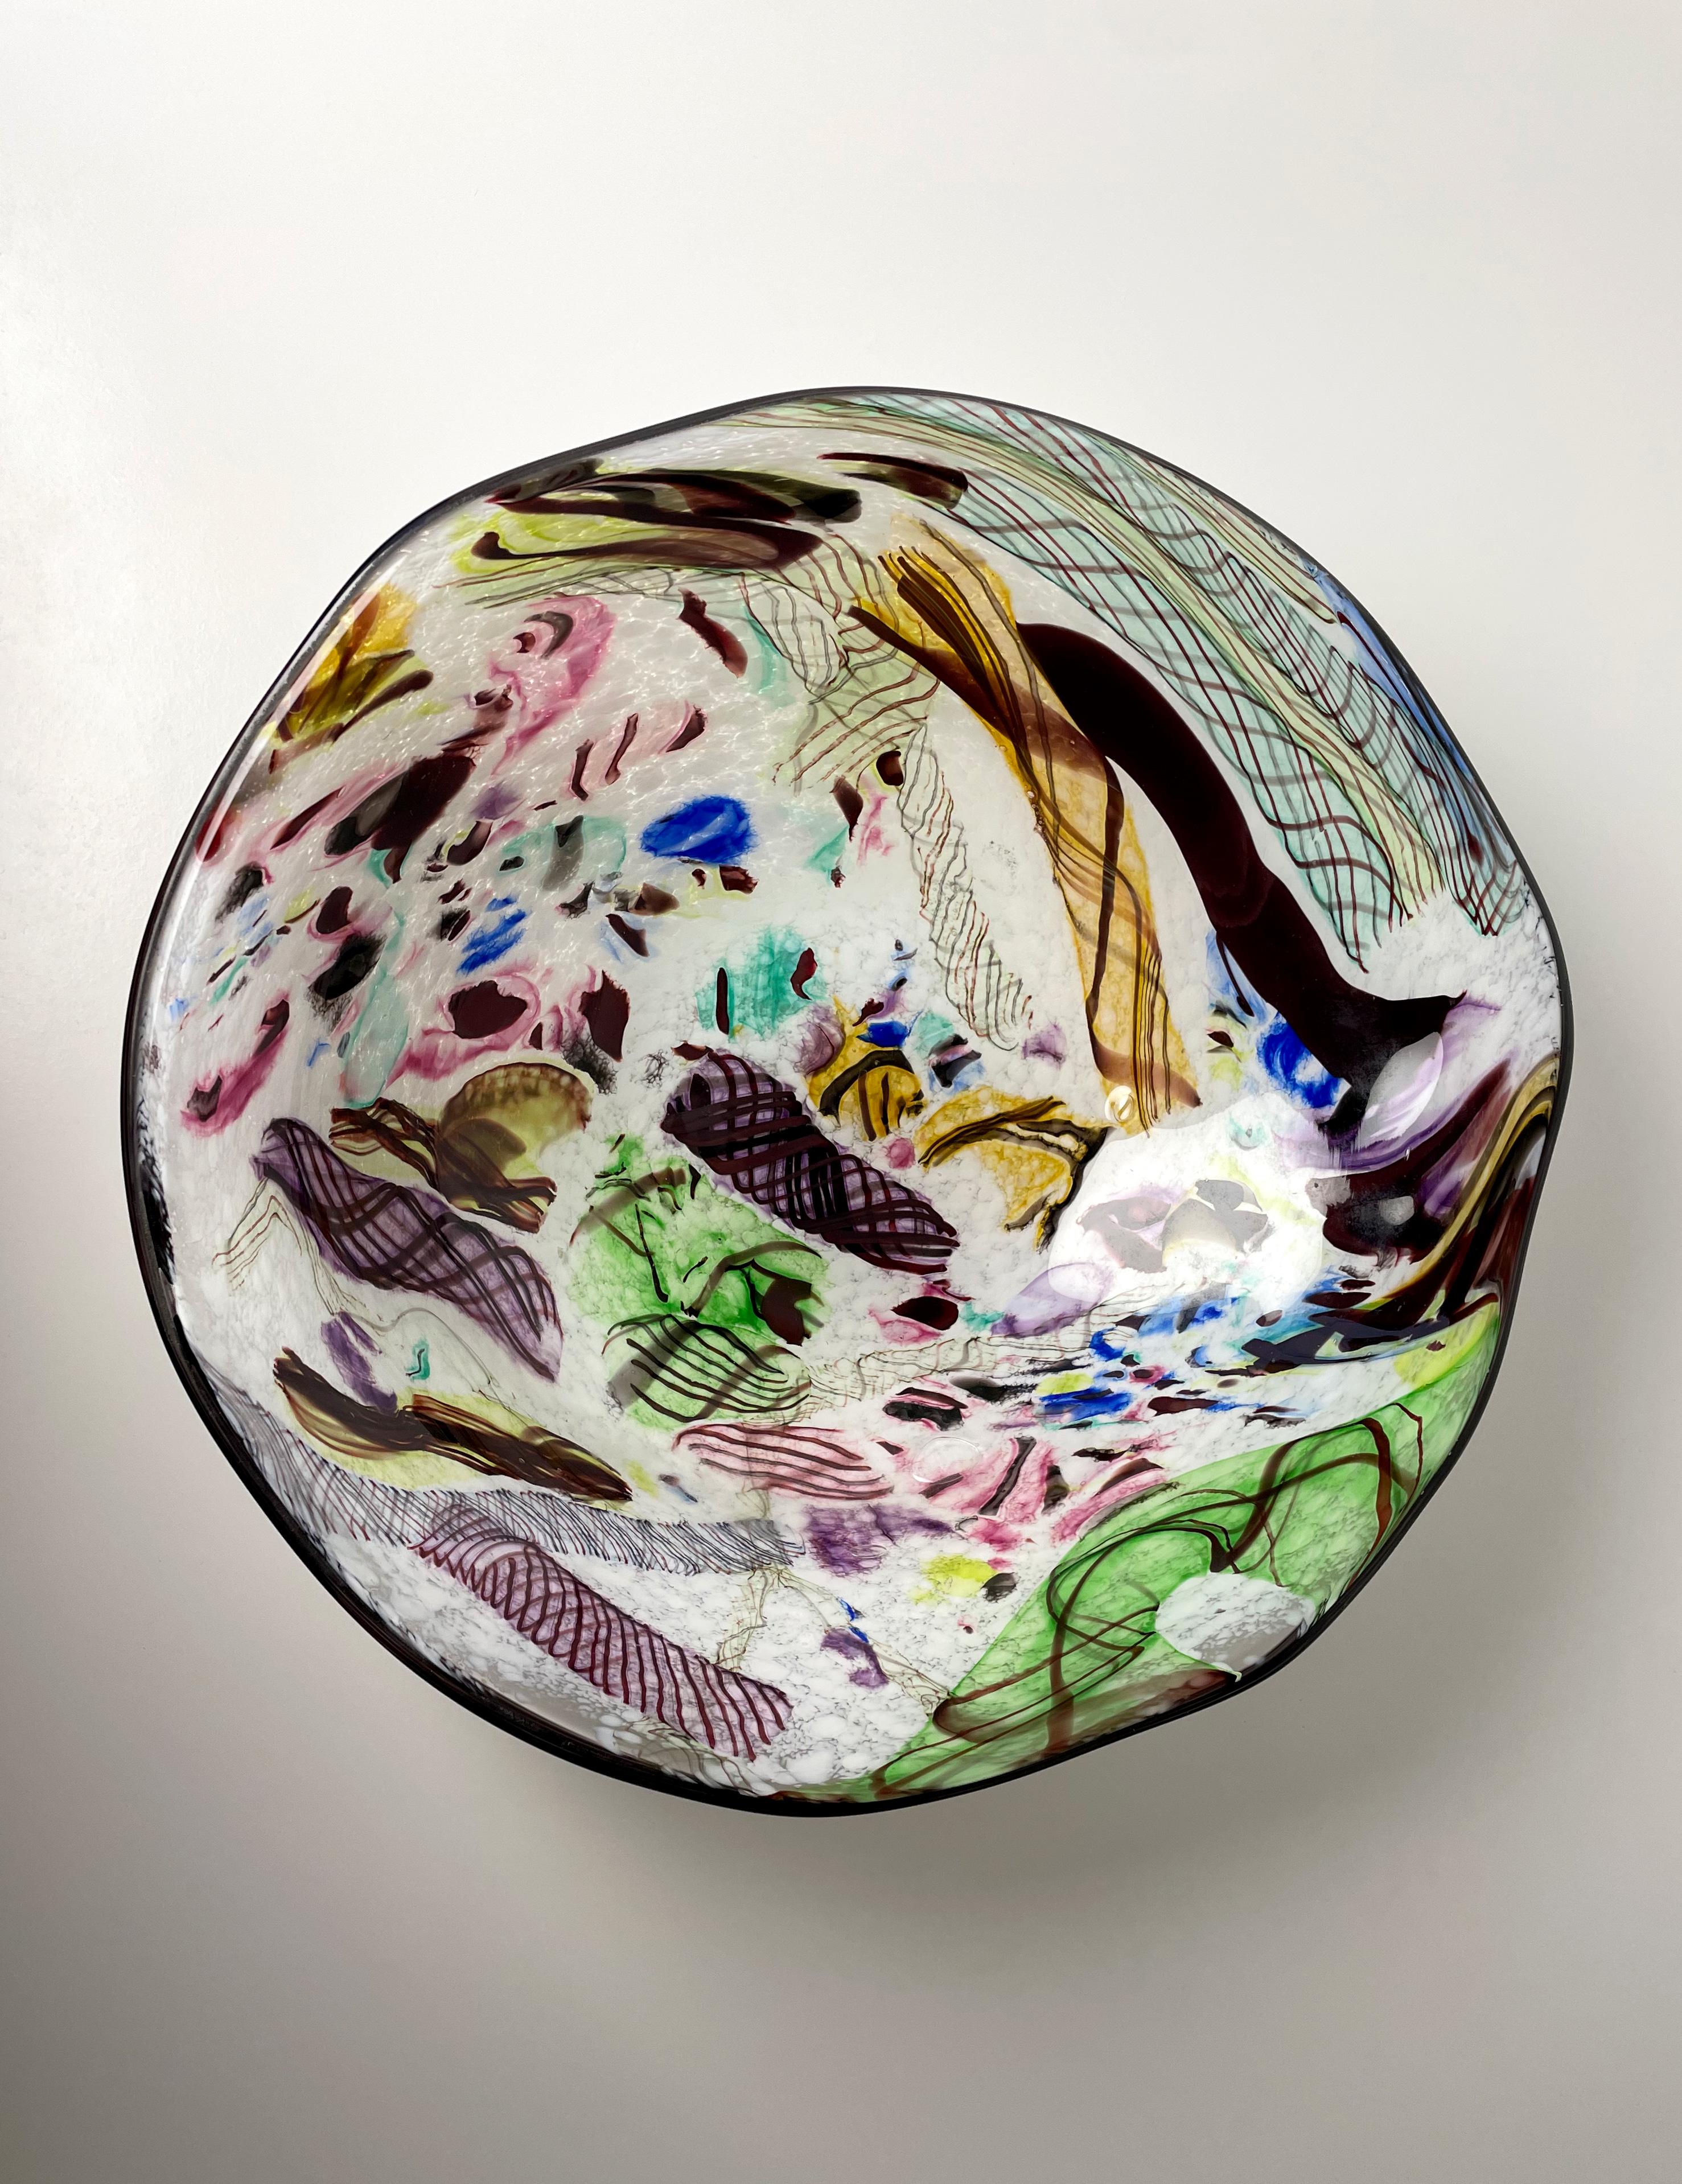 Stunning mouthblown bright colored art glass bowl created in Denmark's northernmost town, Skagen. Delicate lines, curves, patterns and ornamentations in a multitude of colors: Green, pink, cobalt blue, yellow, ochre, purple, maroon and aqua in an